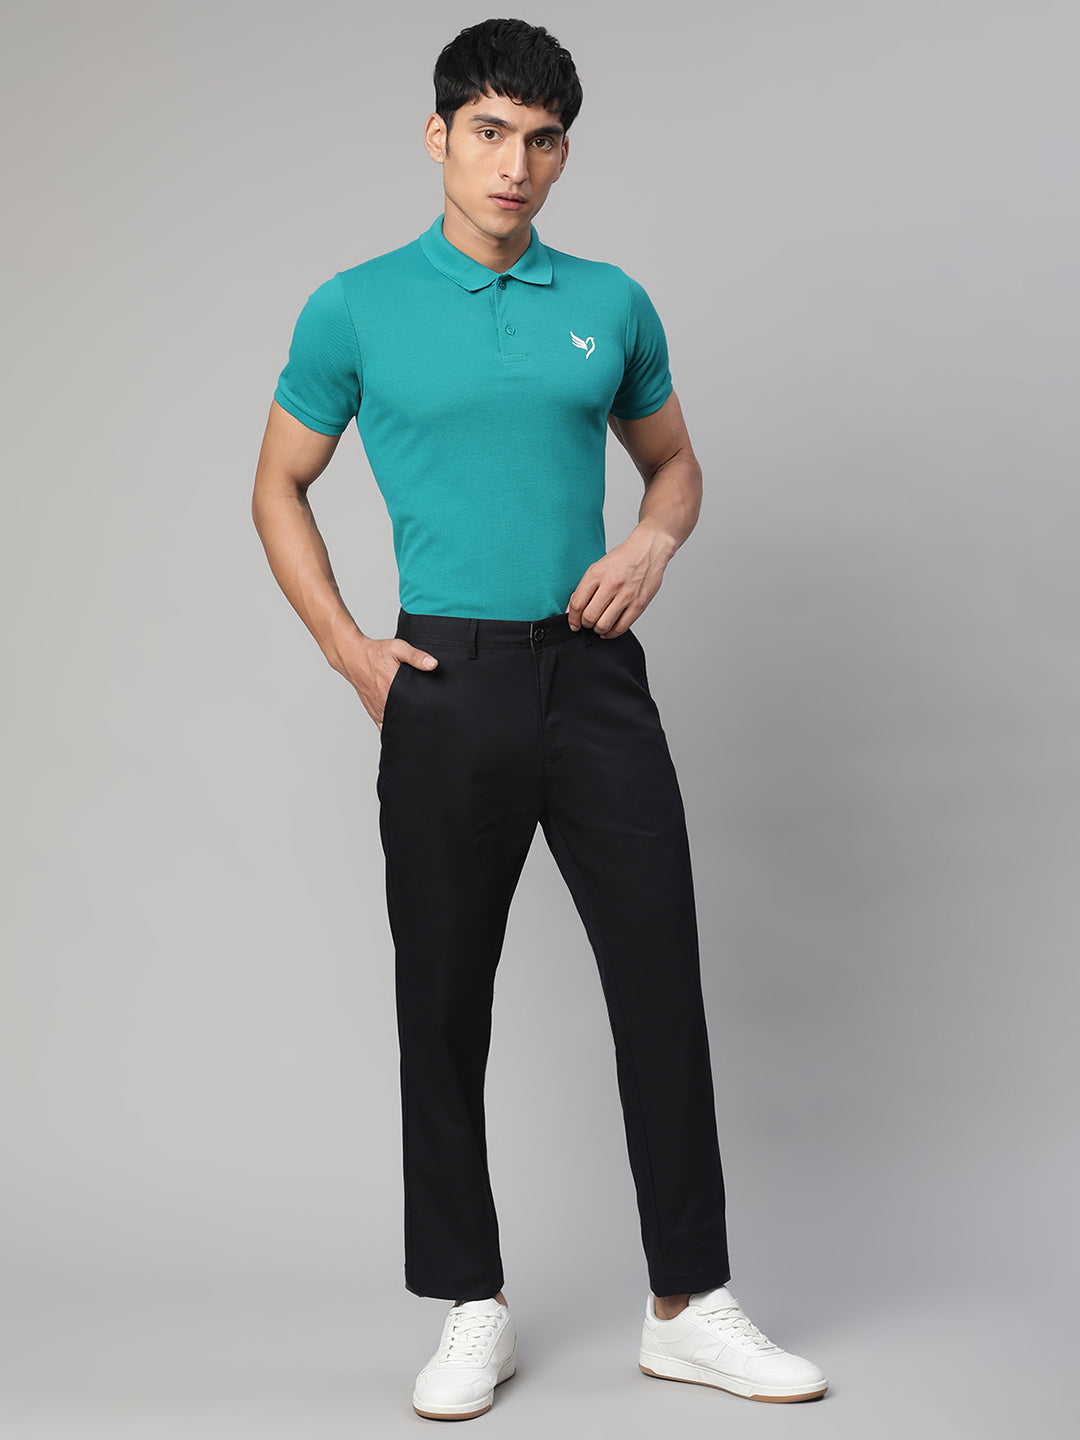 Men Teal Solid Polo T- Shirt